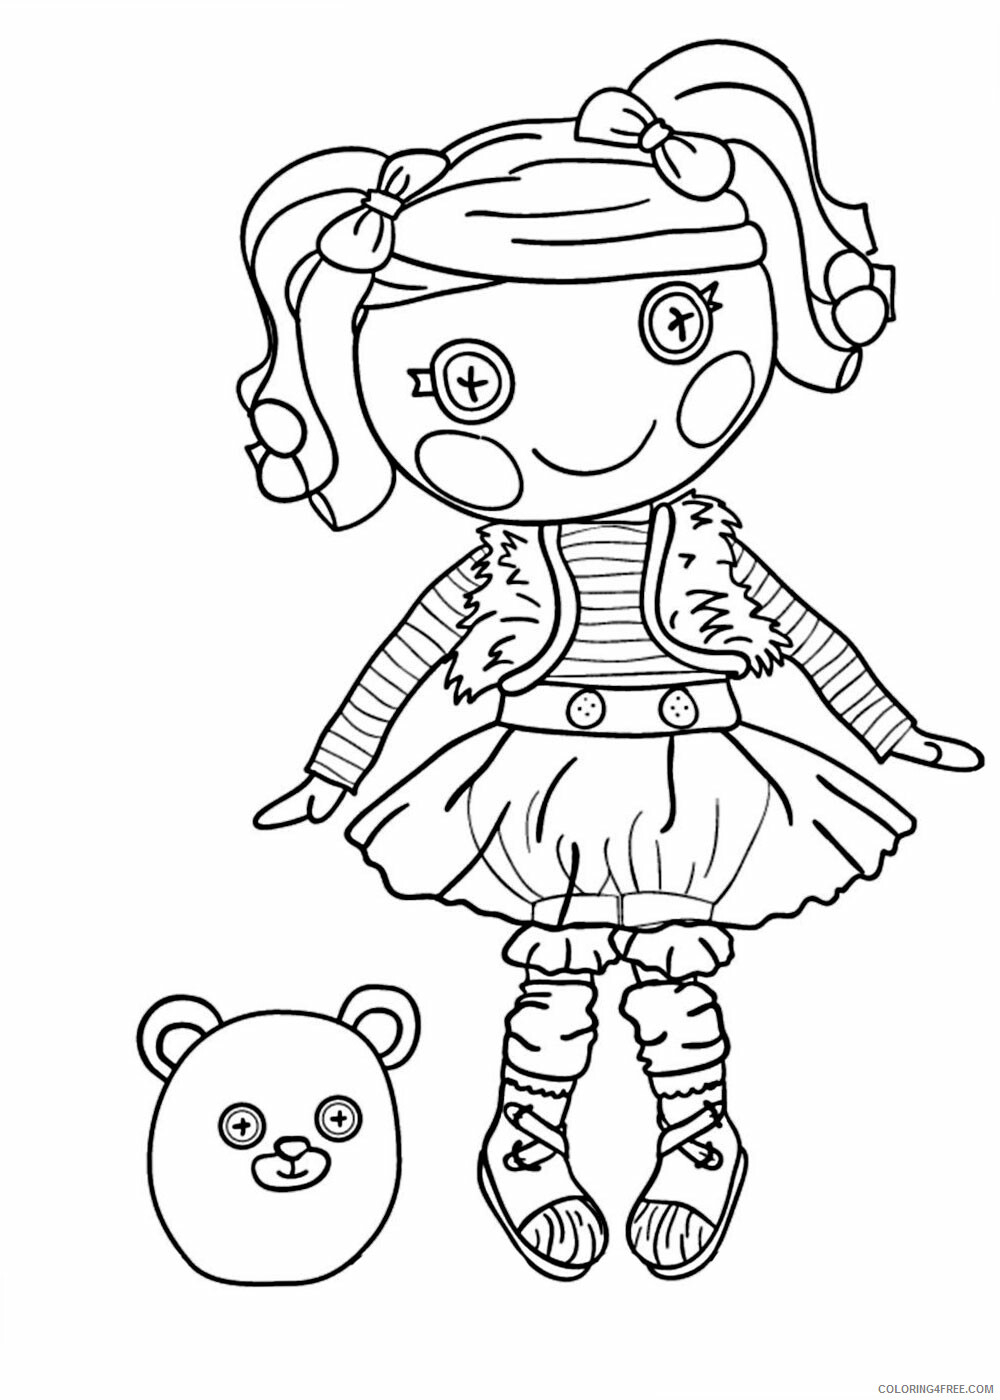 Lalaloopsy Coloring Pages Lalaloopsy Pictures Printable 2021 3757 Coloring4free